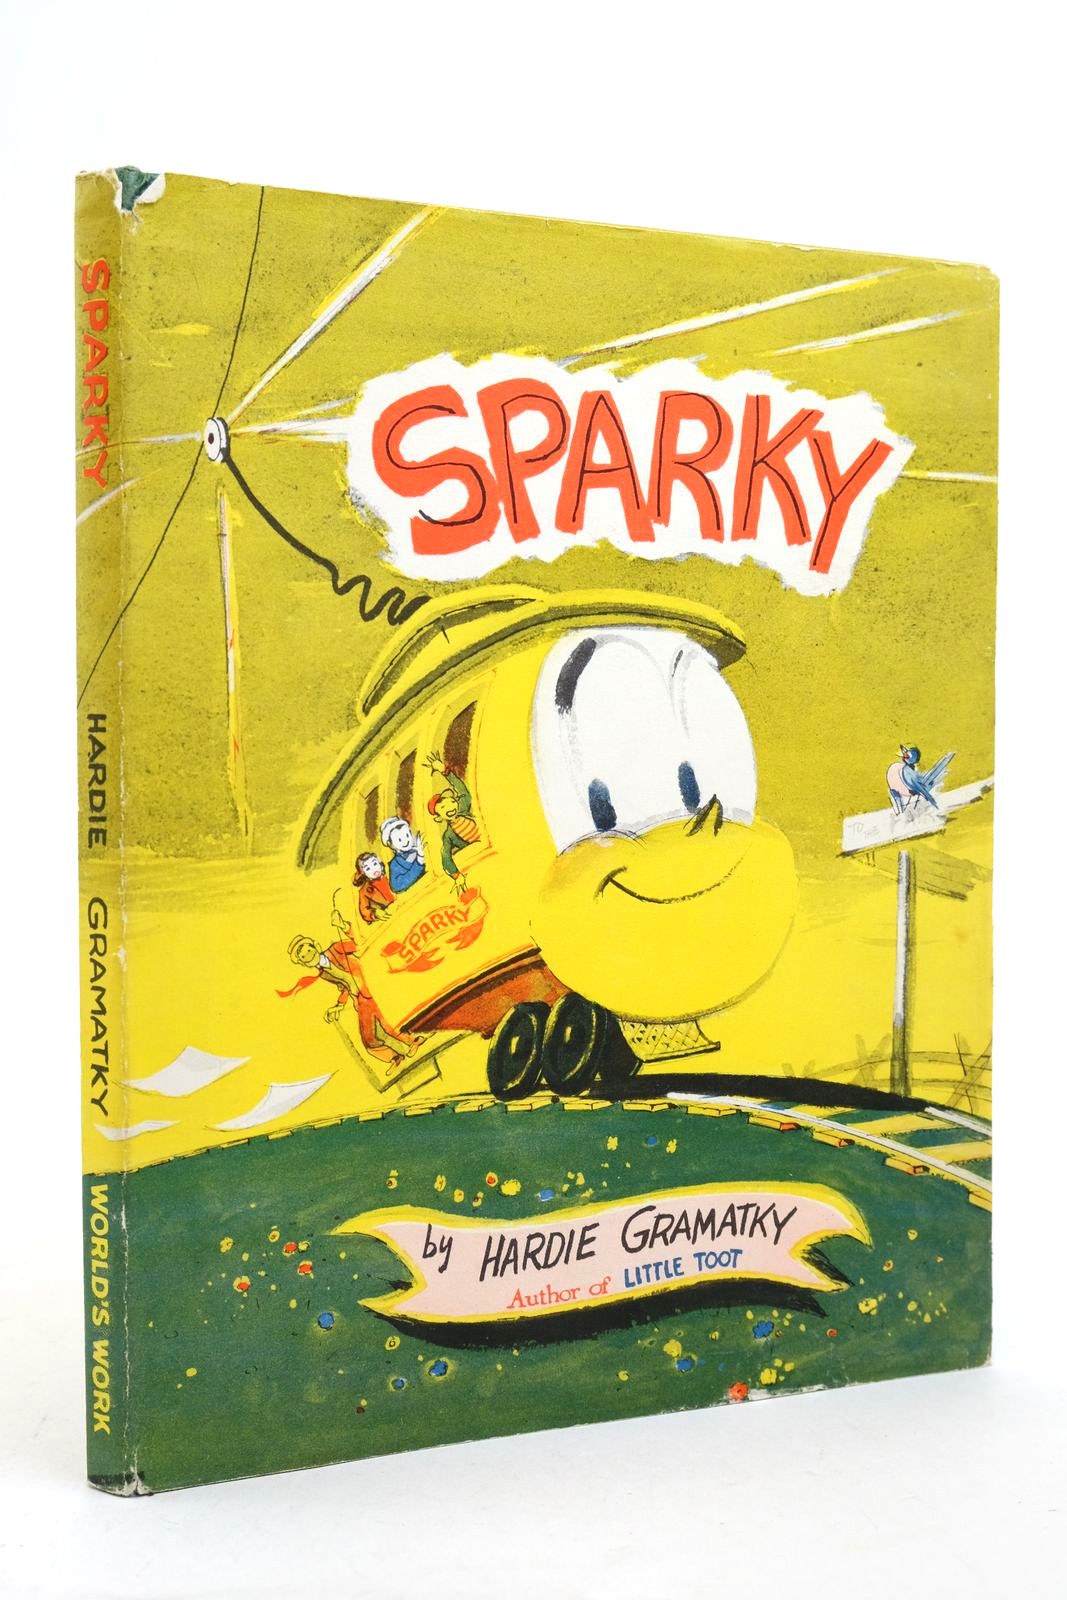 Photo of SPARKY: THE STORY OF A LITTLE TROLLEY CAR written by Gramatky, Hardie illustrated by Gramatky, Hardie published by World's Work Ltd. (STOCK CODE: 2140557)  for sale by Stella & Rose's Books